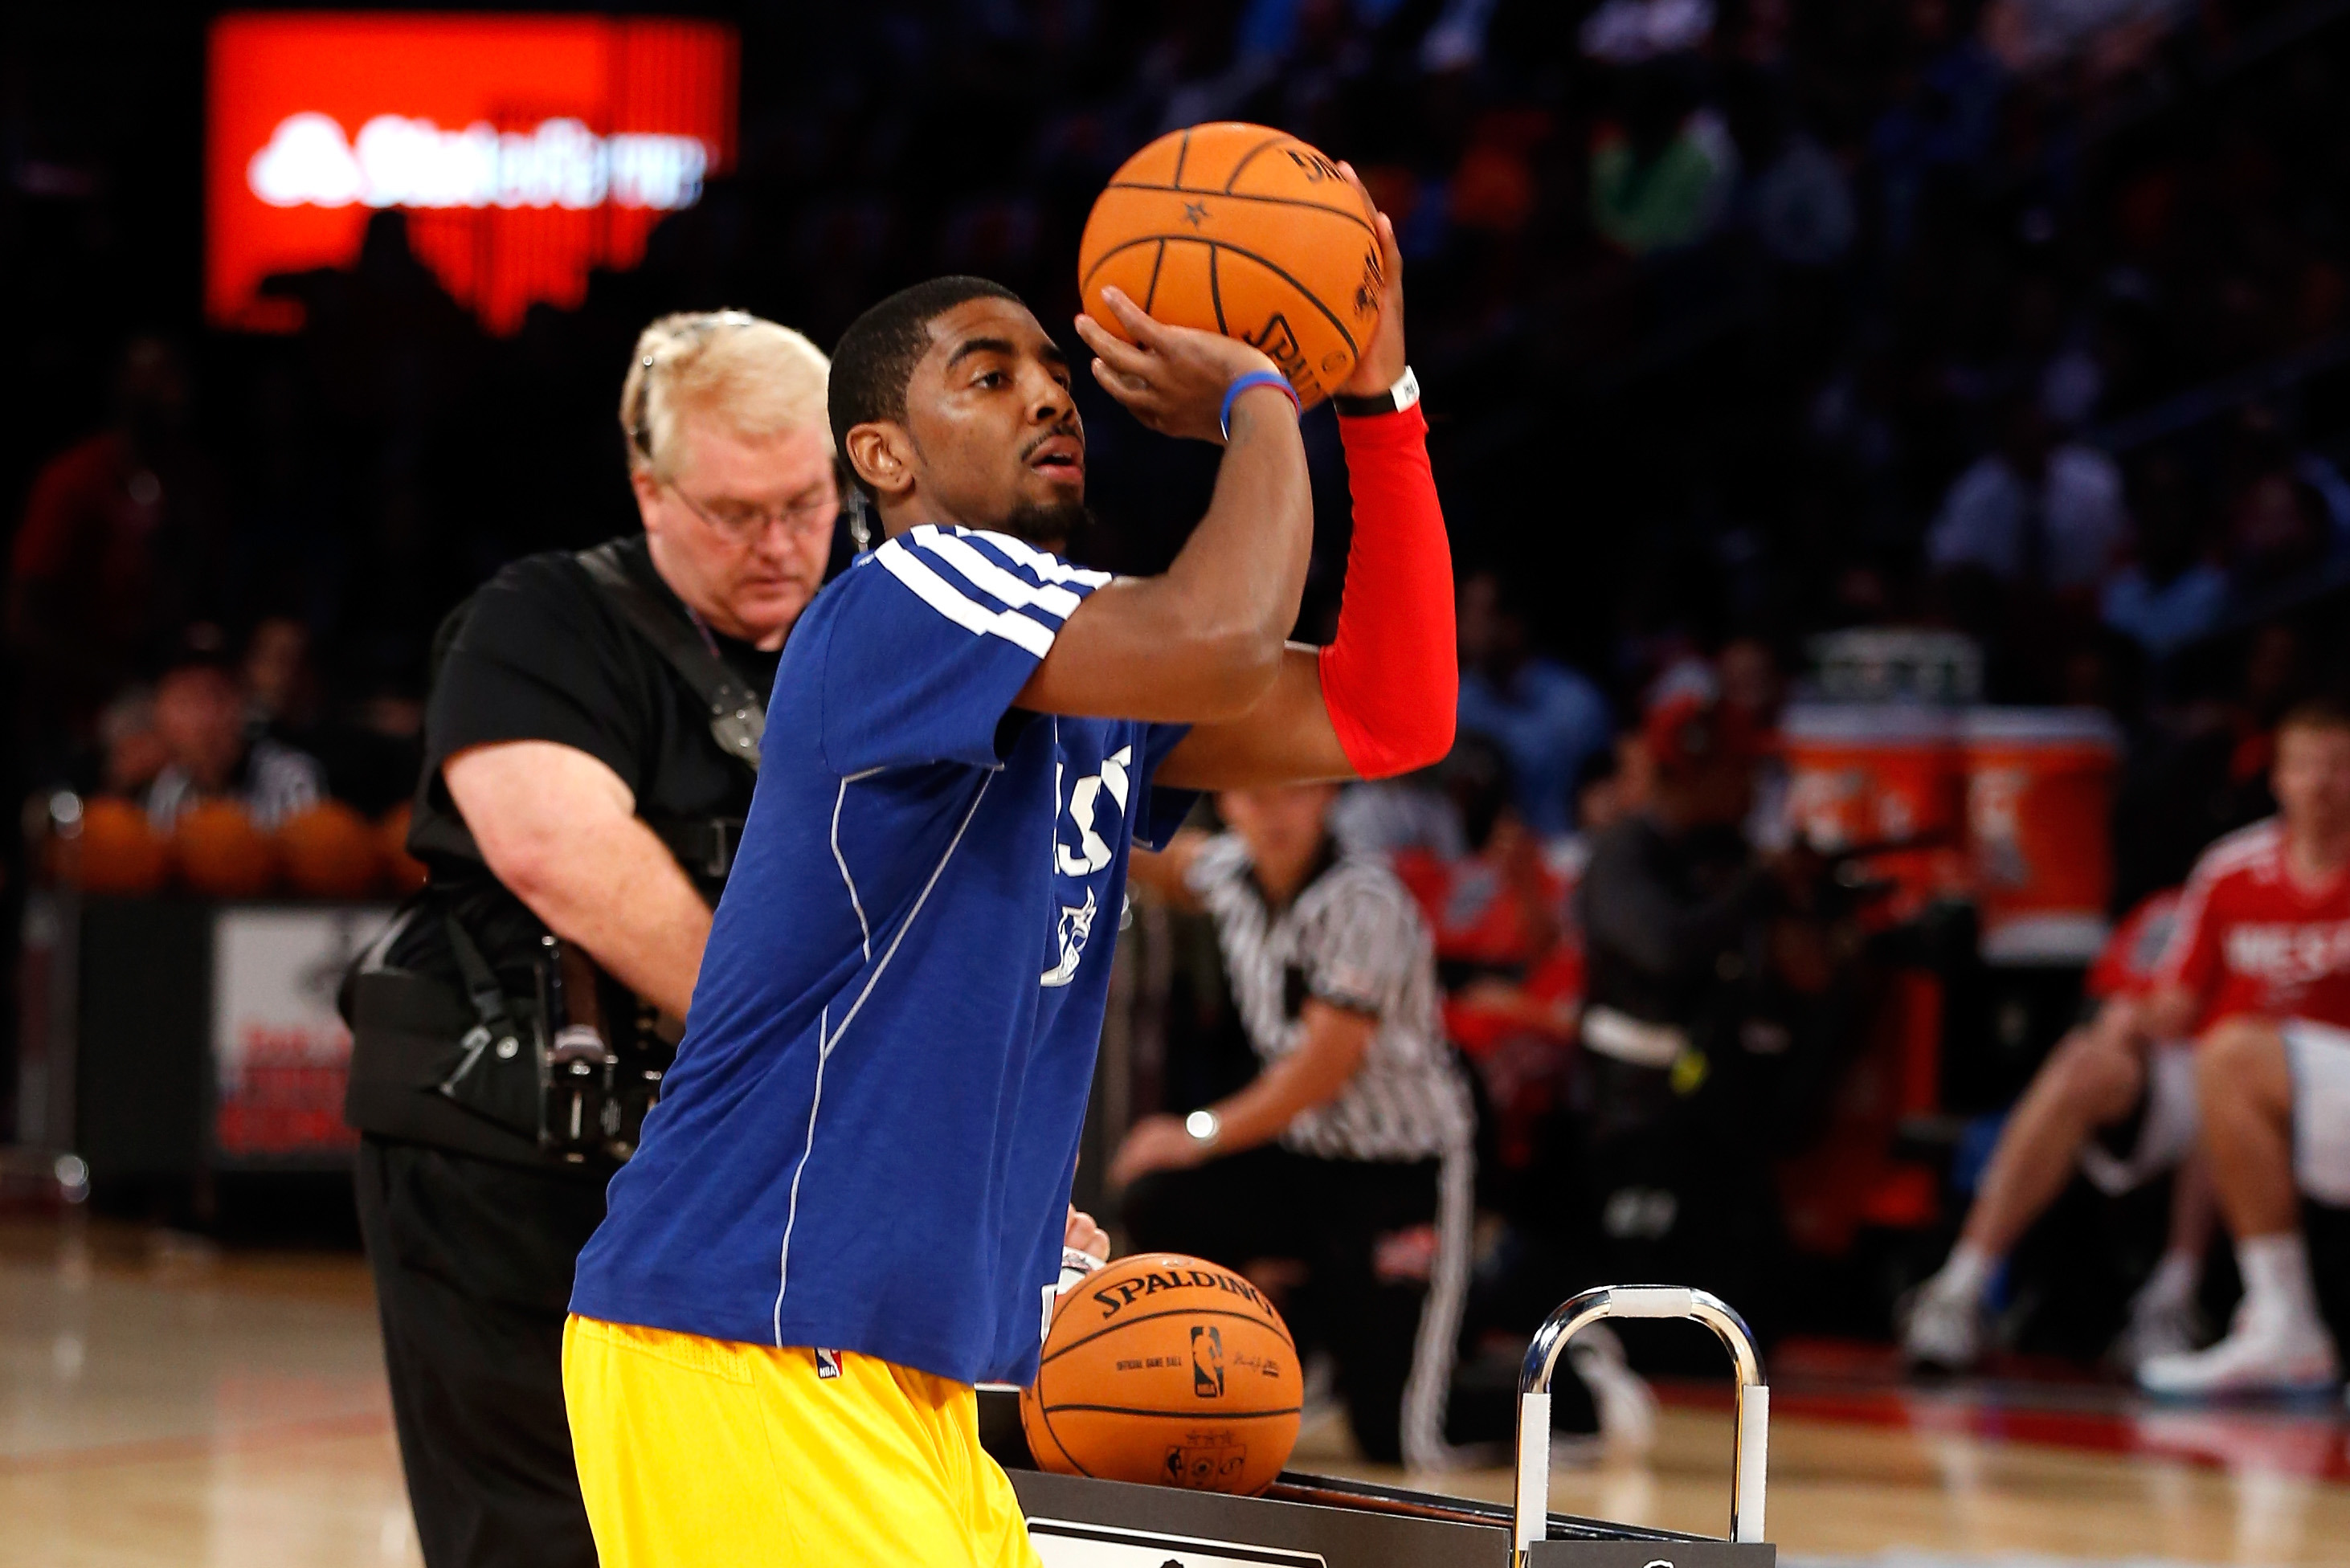 Kyrie Irving will take part in skills competition during All-Star